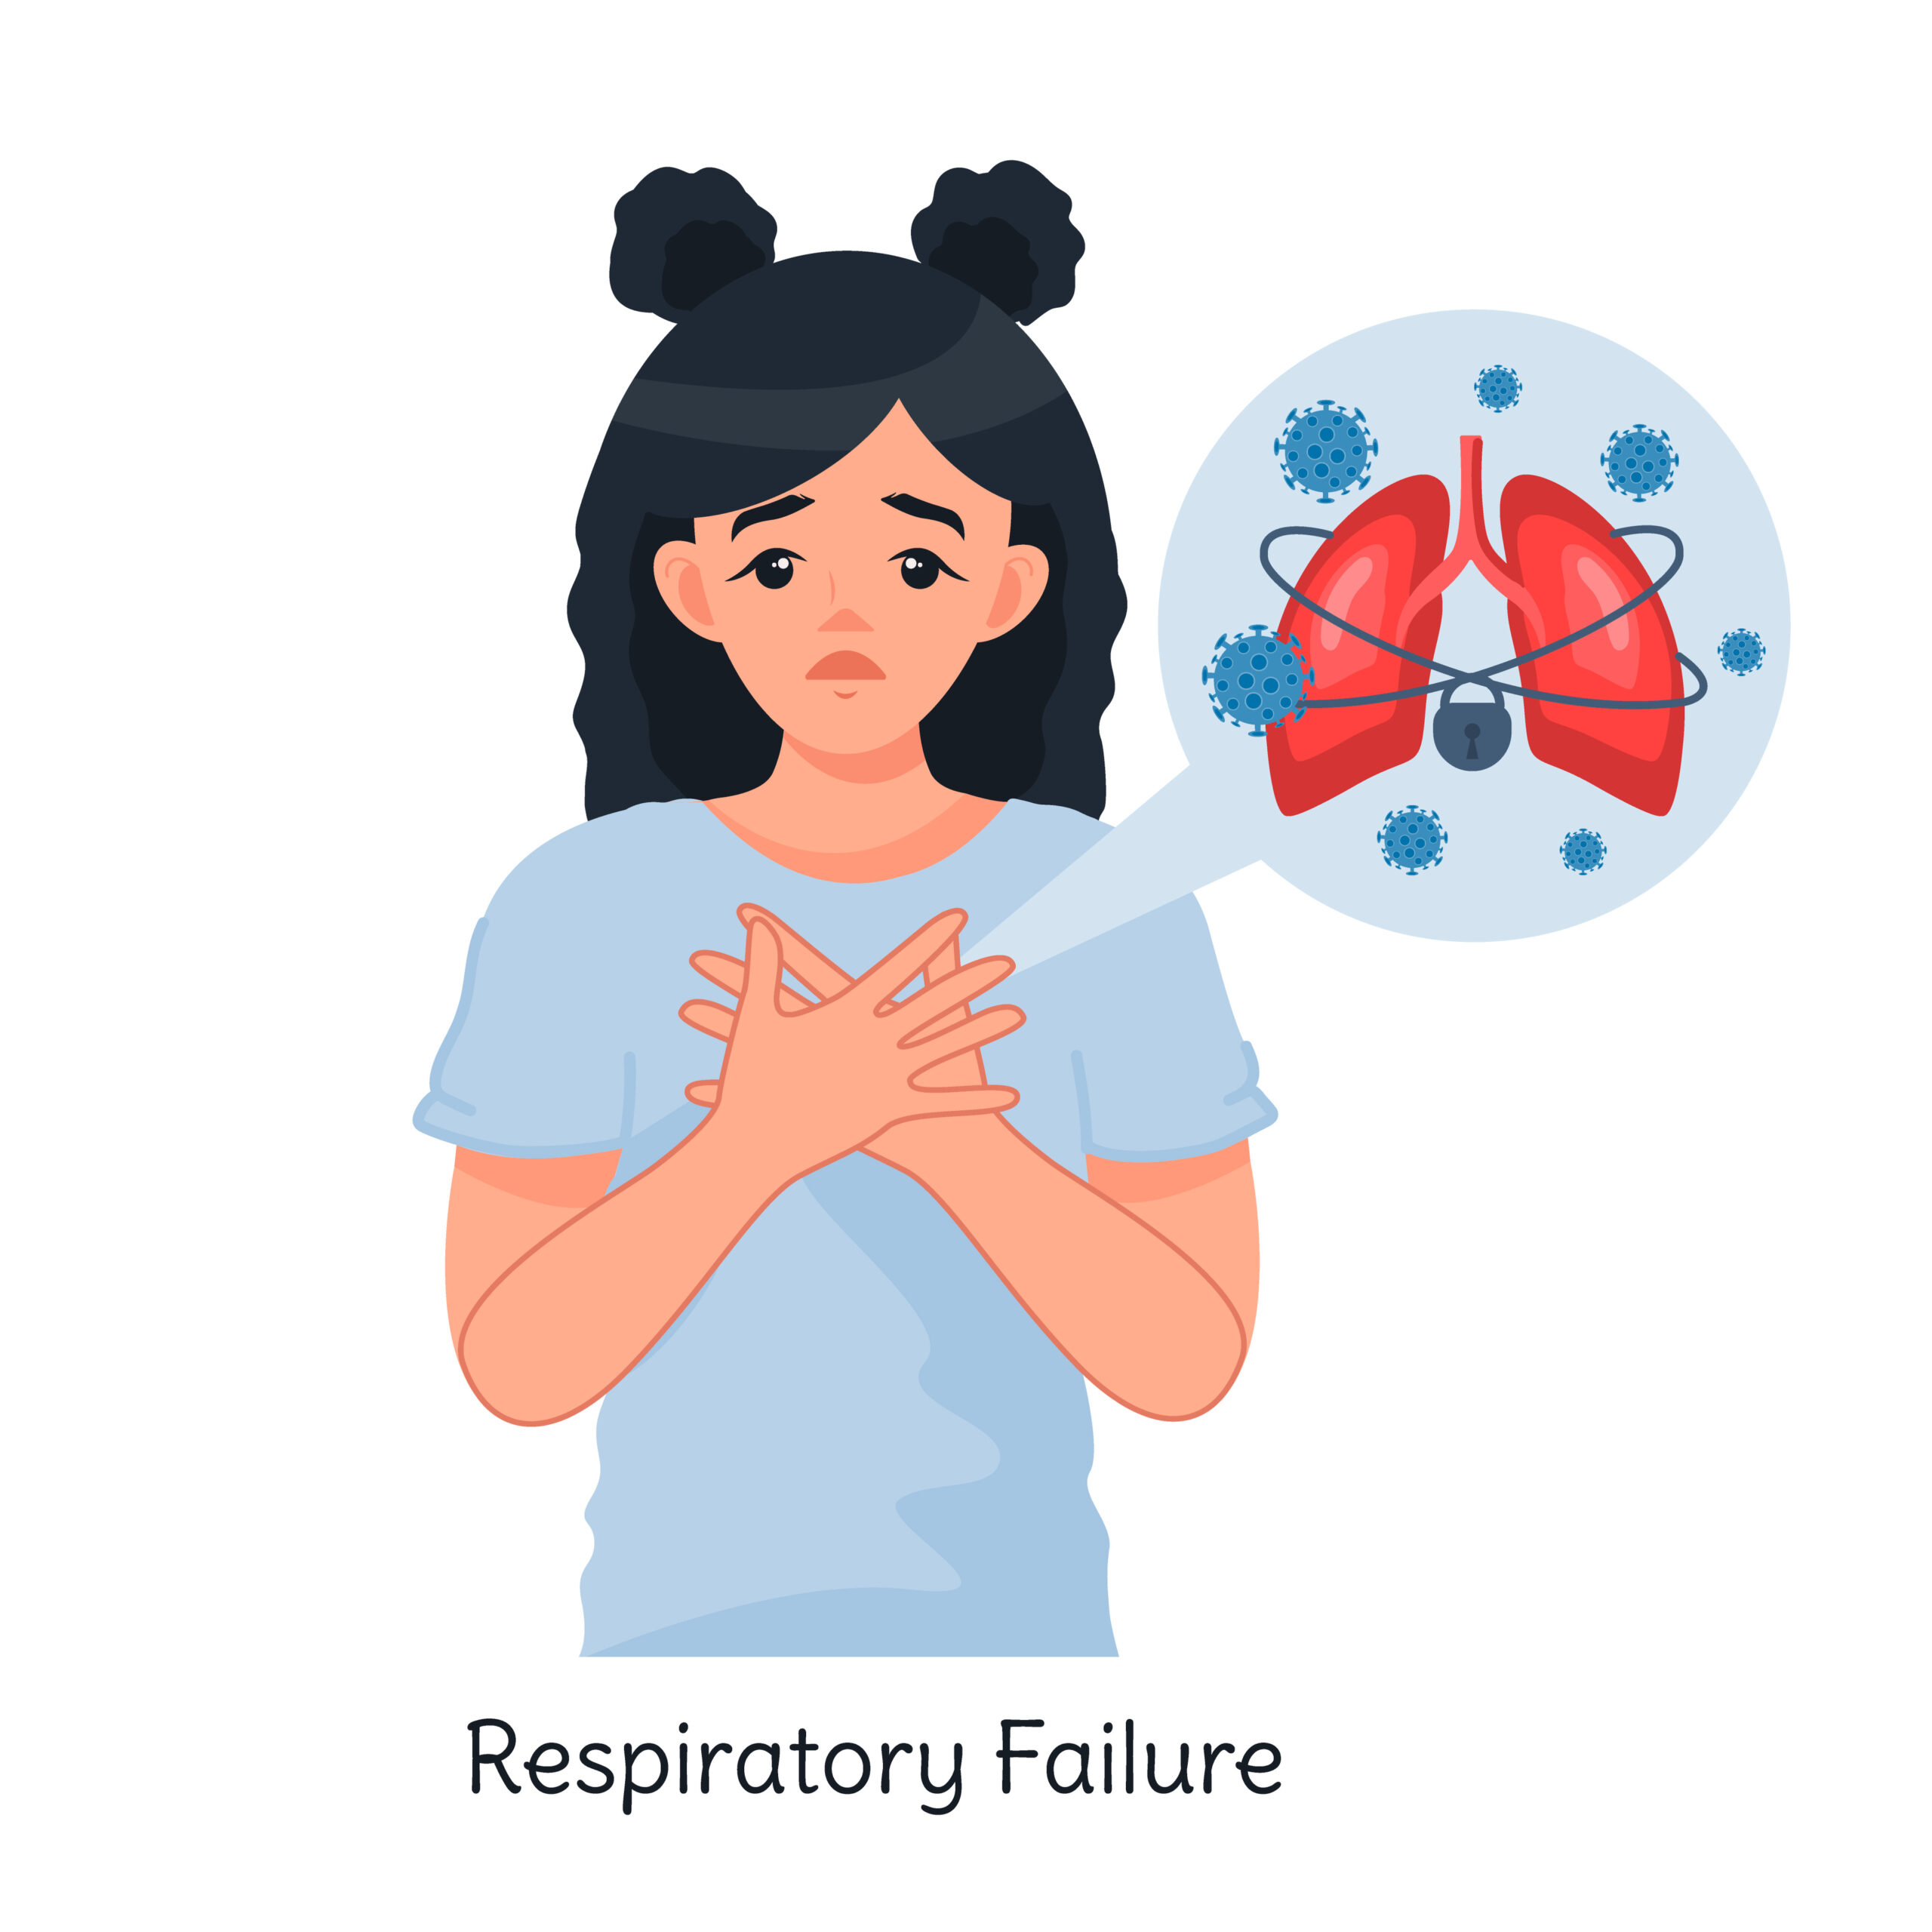 An illustration of a women clutching her chest and experiencing respiratory failure.